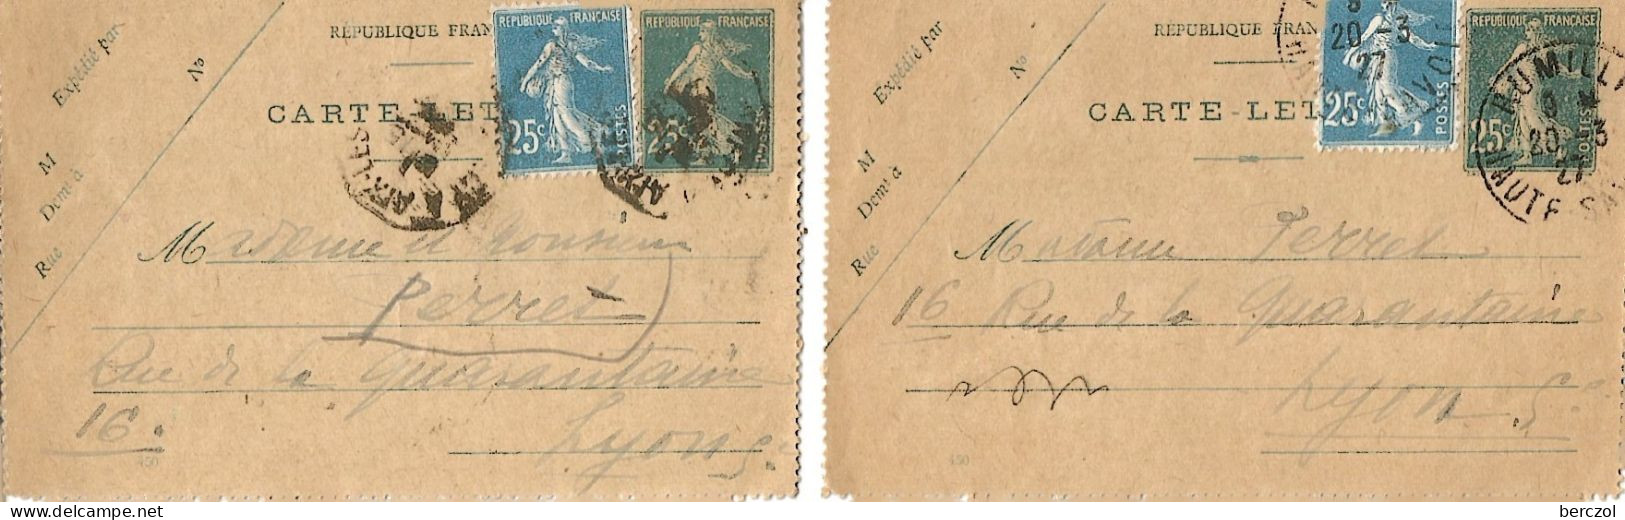 FRANCE ANNEE1907/1939 LOT DE 2 ENTIERS TYPE SEMEUSE CAMEE N° 140 CL1  TB DATE : 450 - Cartes-lettres